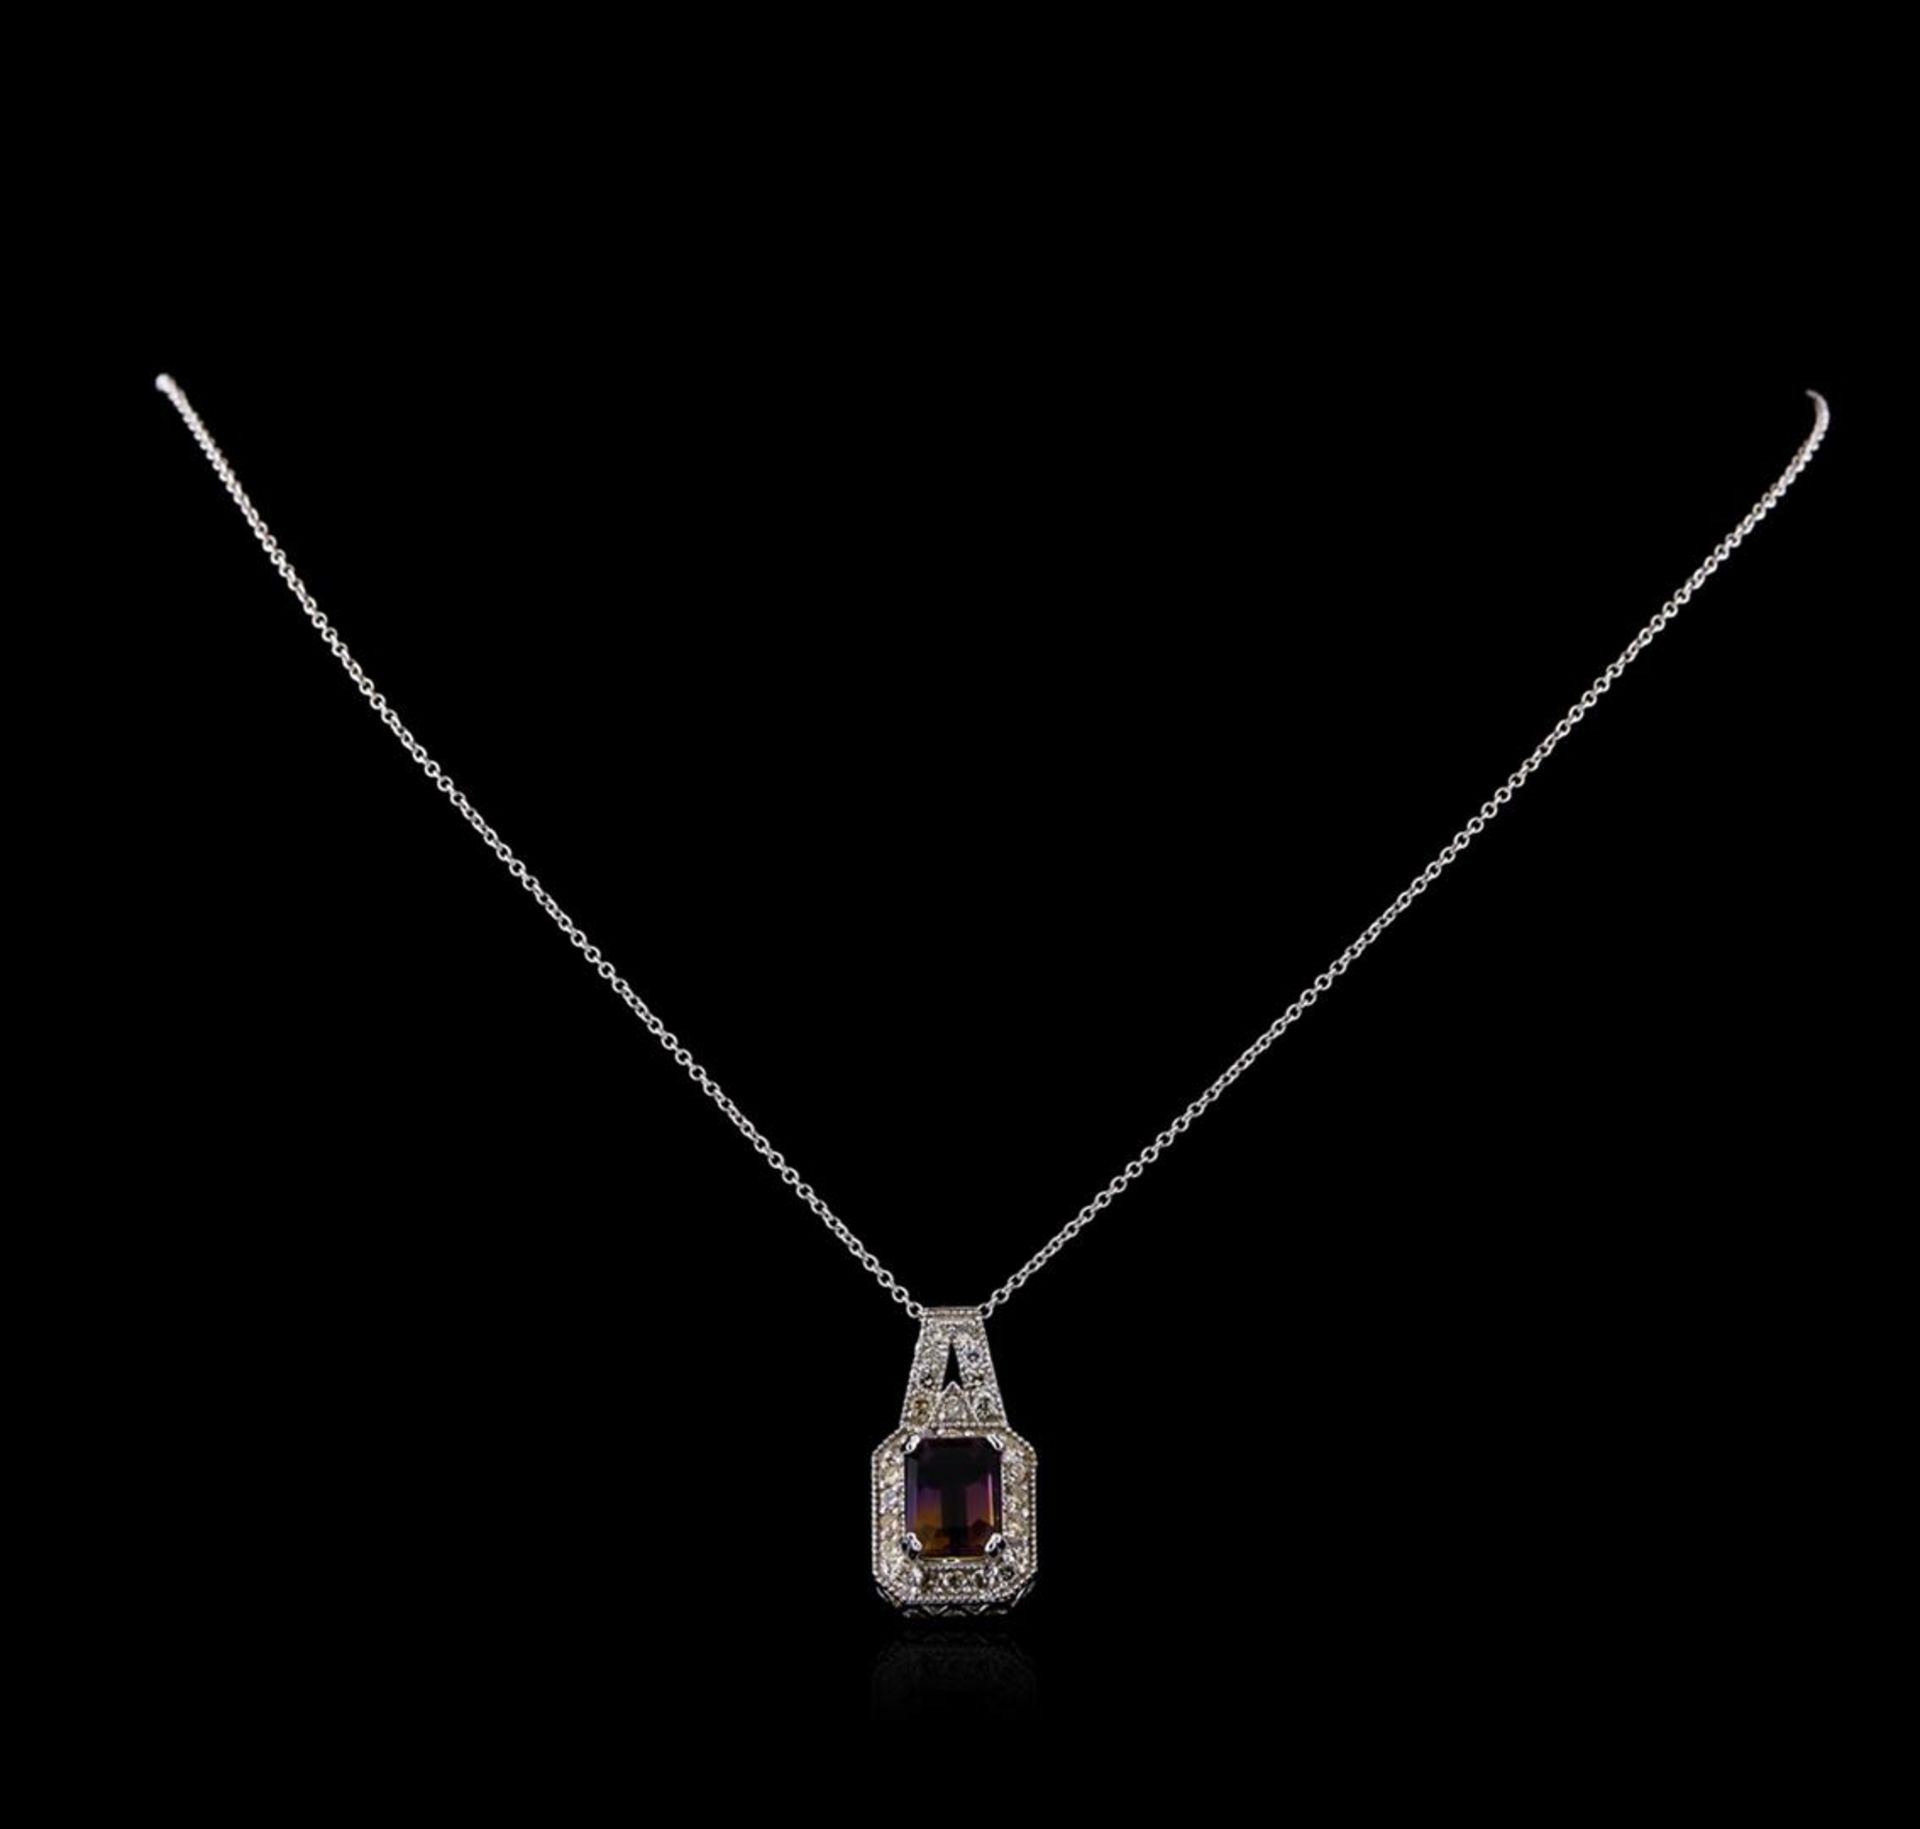 2.75 ctw Ametrine and Diamond Pendant With Chain - 14KT White Gold - Image 2 of 3